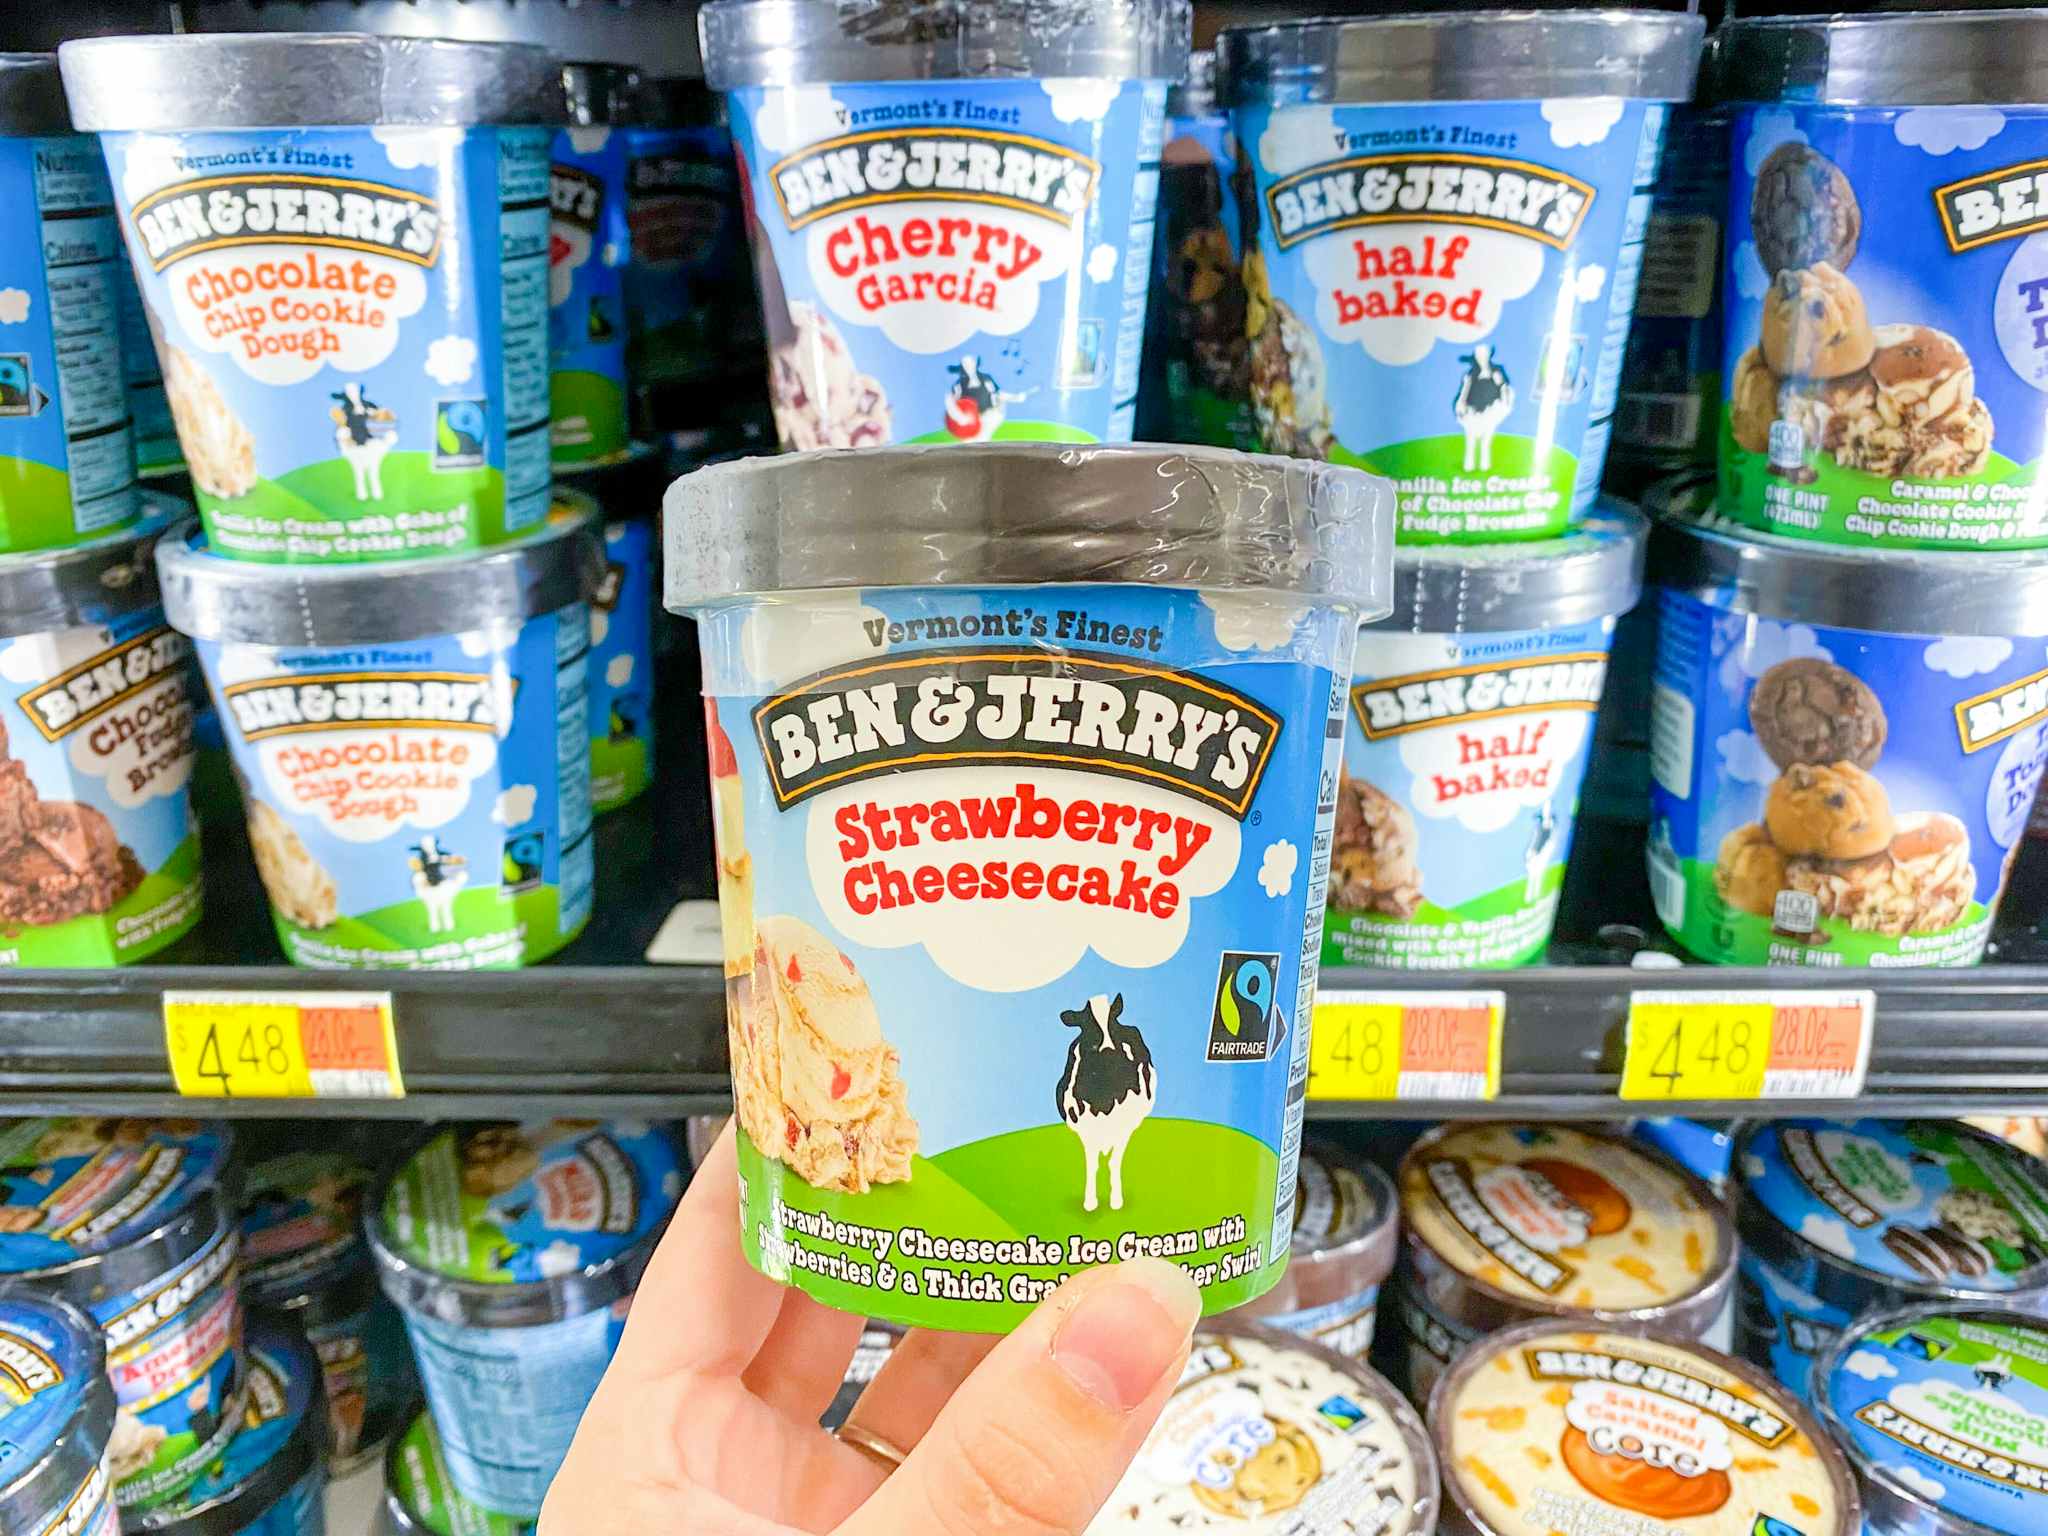 Ben & Jerry's Strawberry Cheesecake Ice Cream held in front of shelf full of Ben & Jerry's products at Walmart